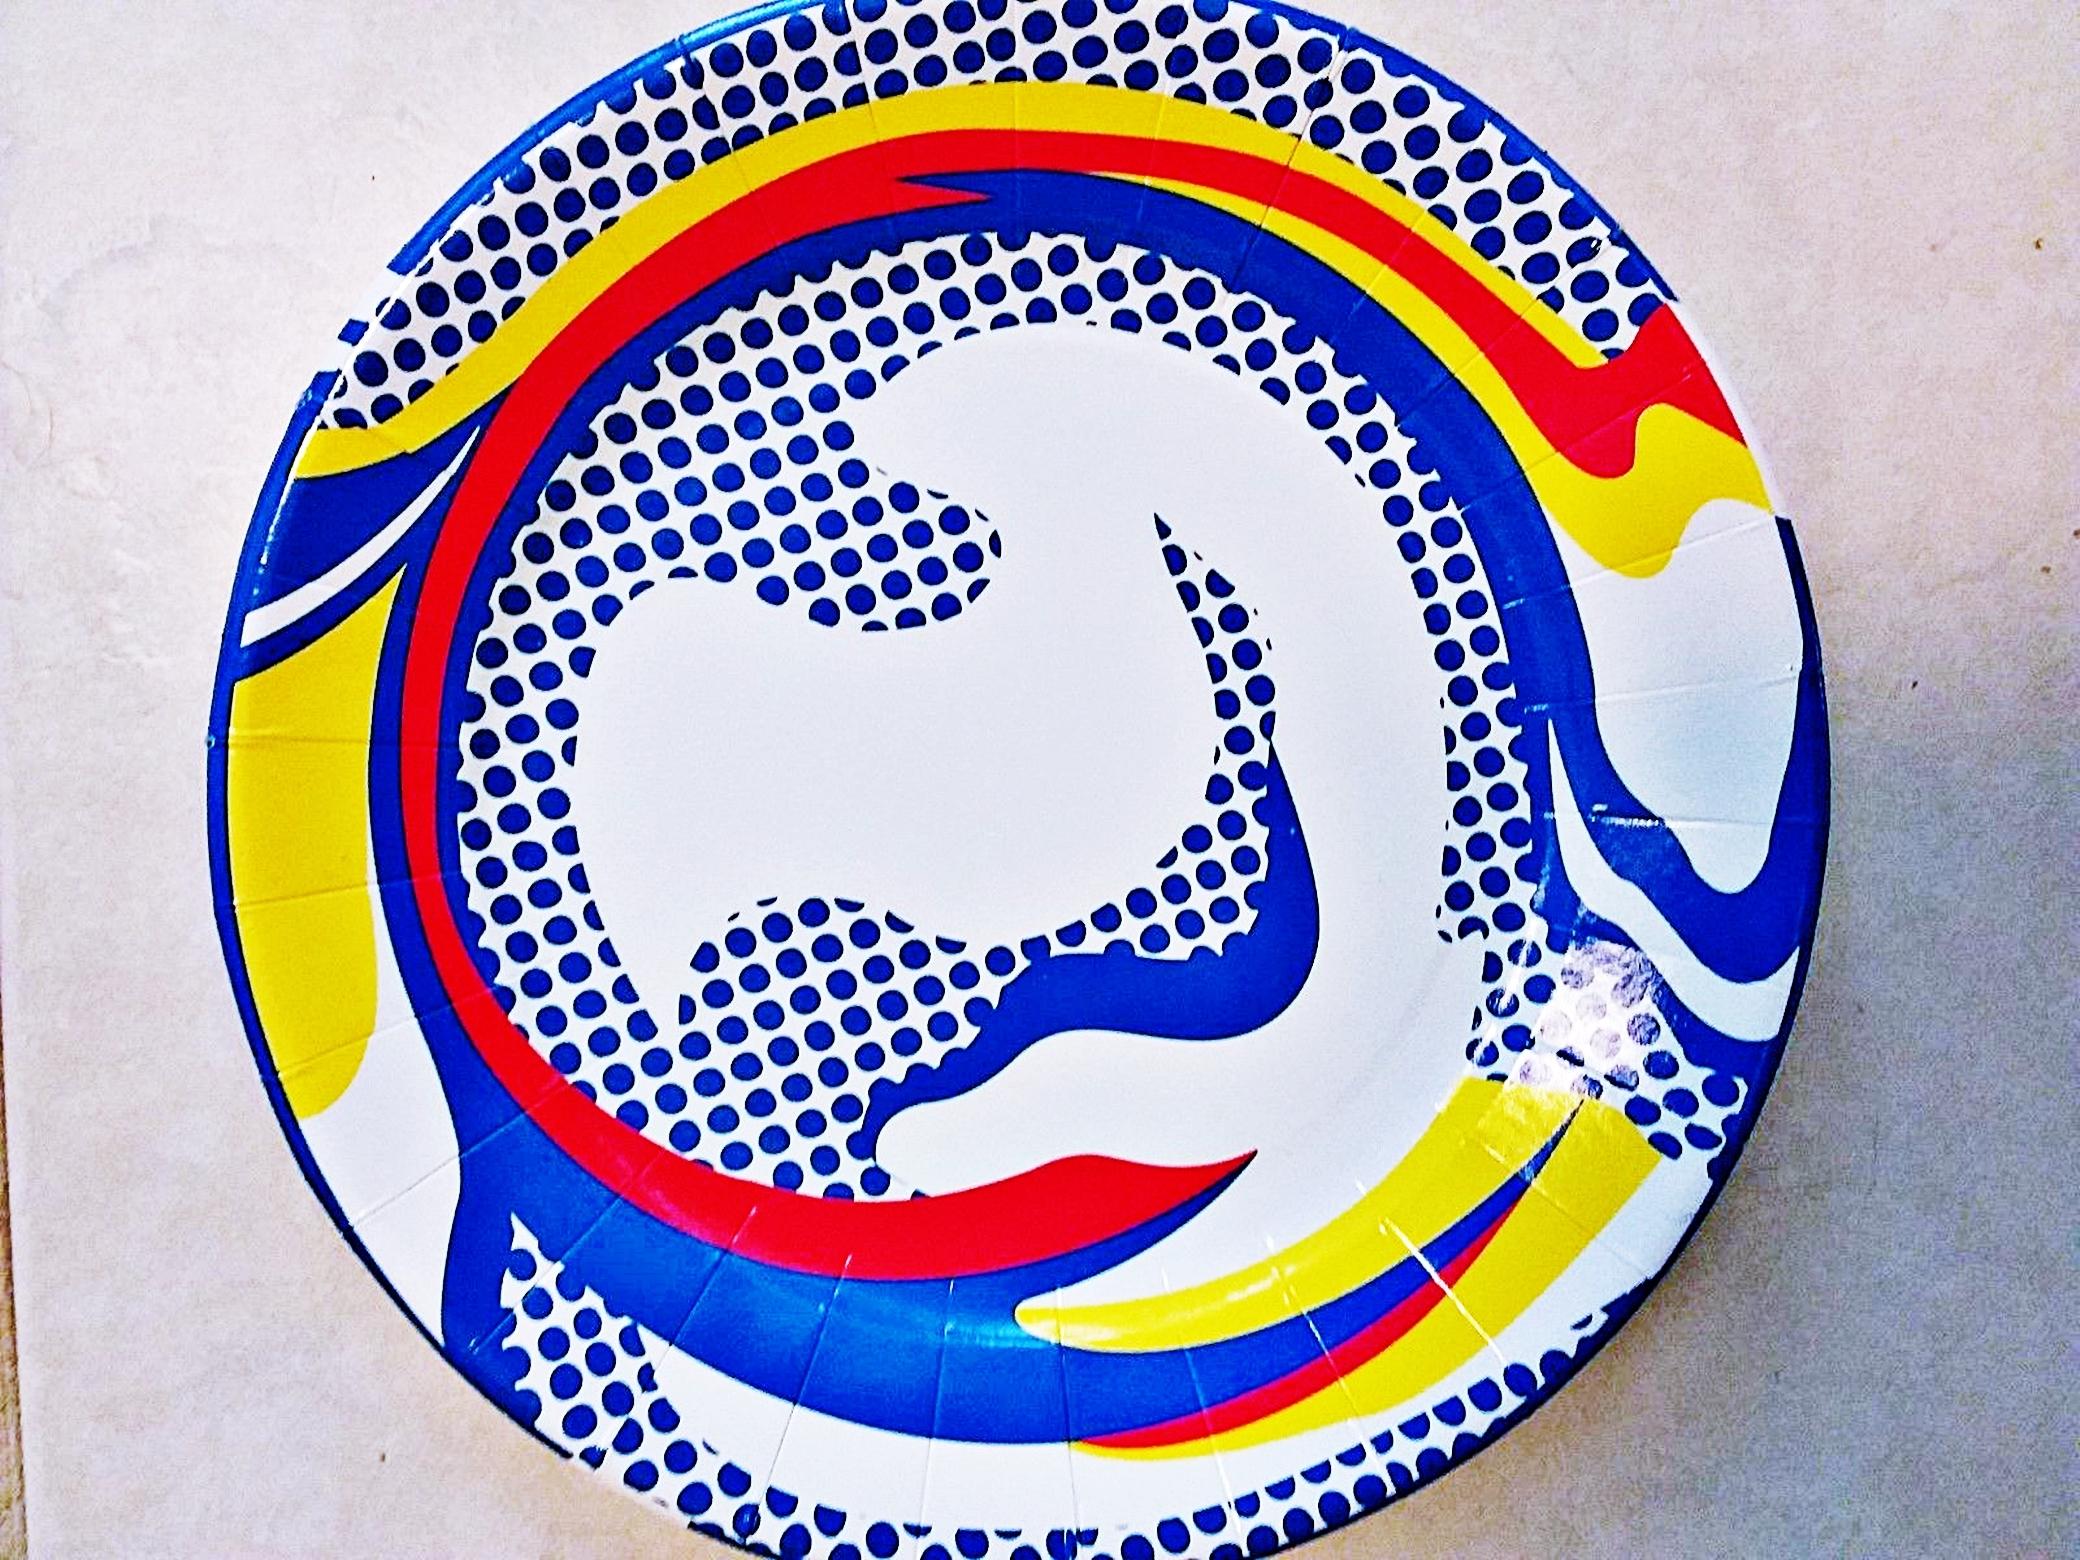 Screenprinted Paper Plate Foundation & Estate authorized exclusively for Barneys - Print by Roy Lichtenstein